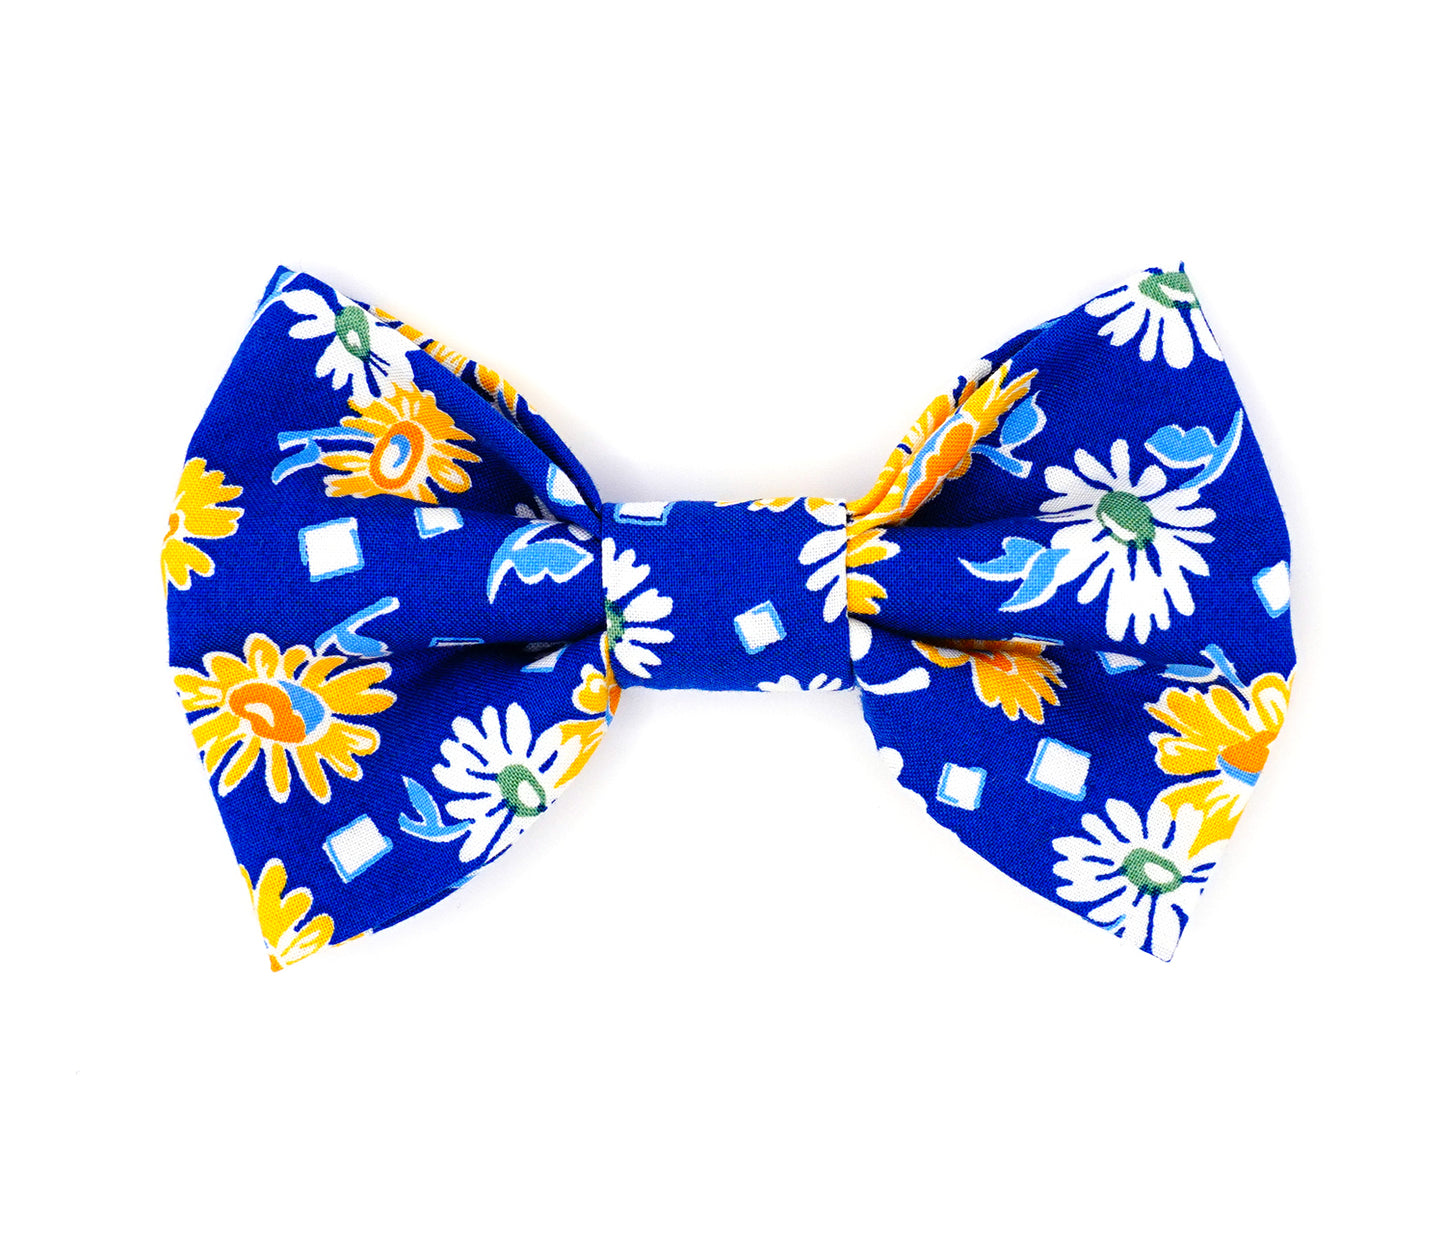 Handmade cotton bow tie for dogs (or other pets). Elastic straps on back with snaps make it easy to add to collar, harness, or leash. Bright blue background with yellow, white, green and light blue flowers and shapes.